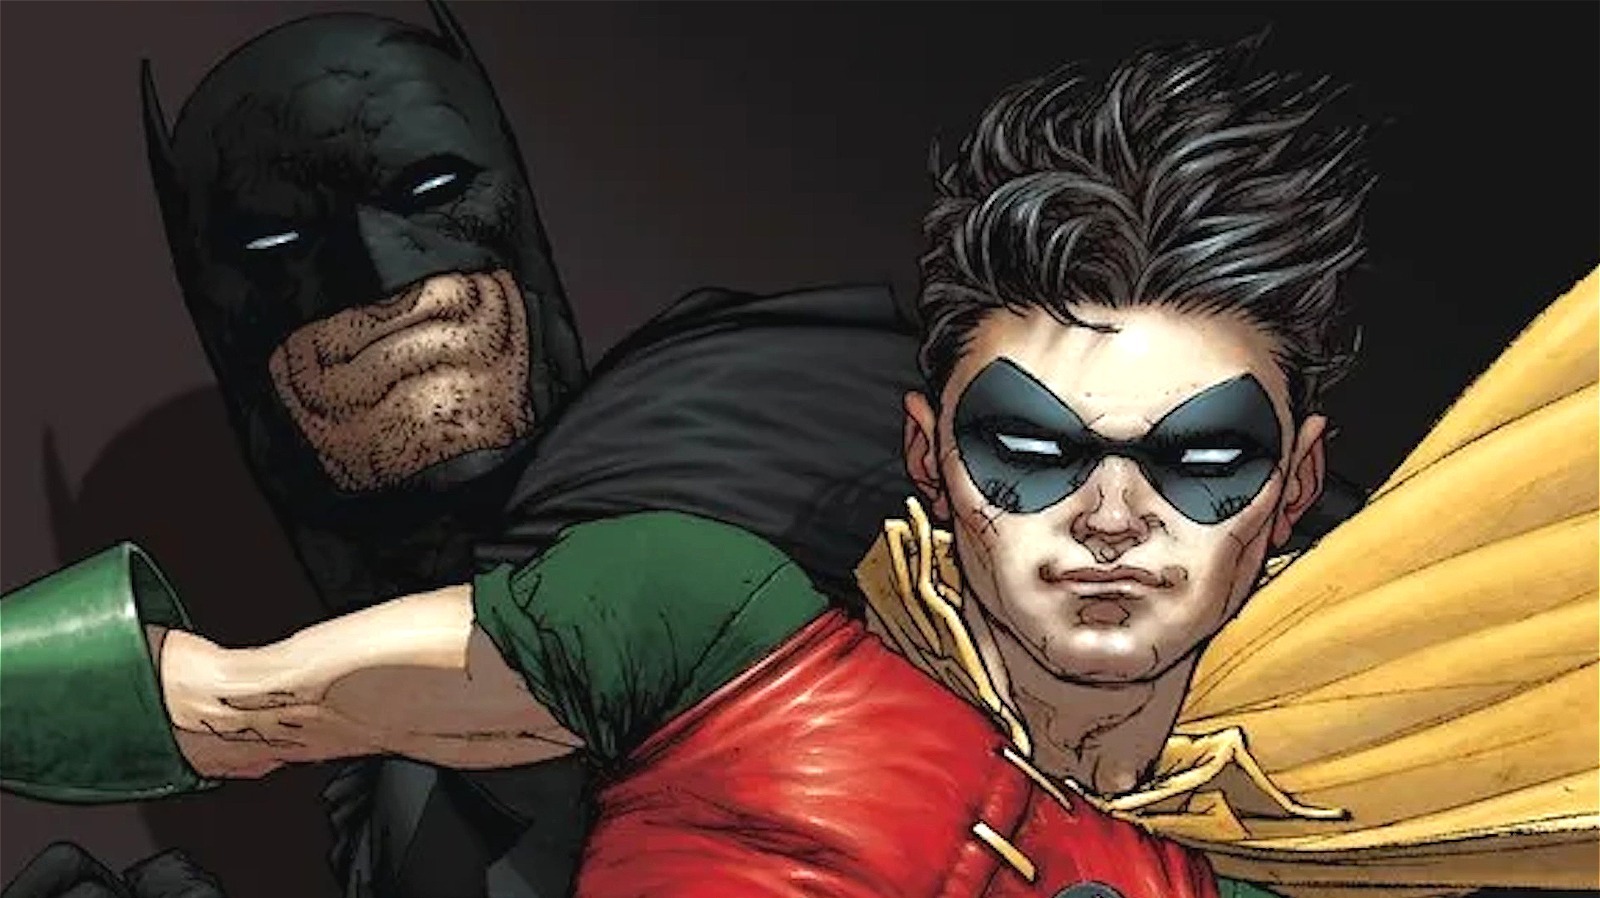 The Brave And The Bold: How Grant Morrison's Batman And Robin Storyline  Could Shape The DCU